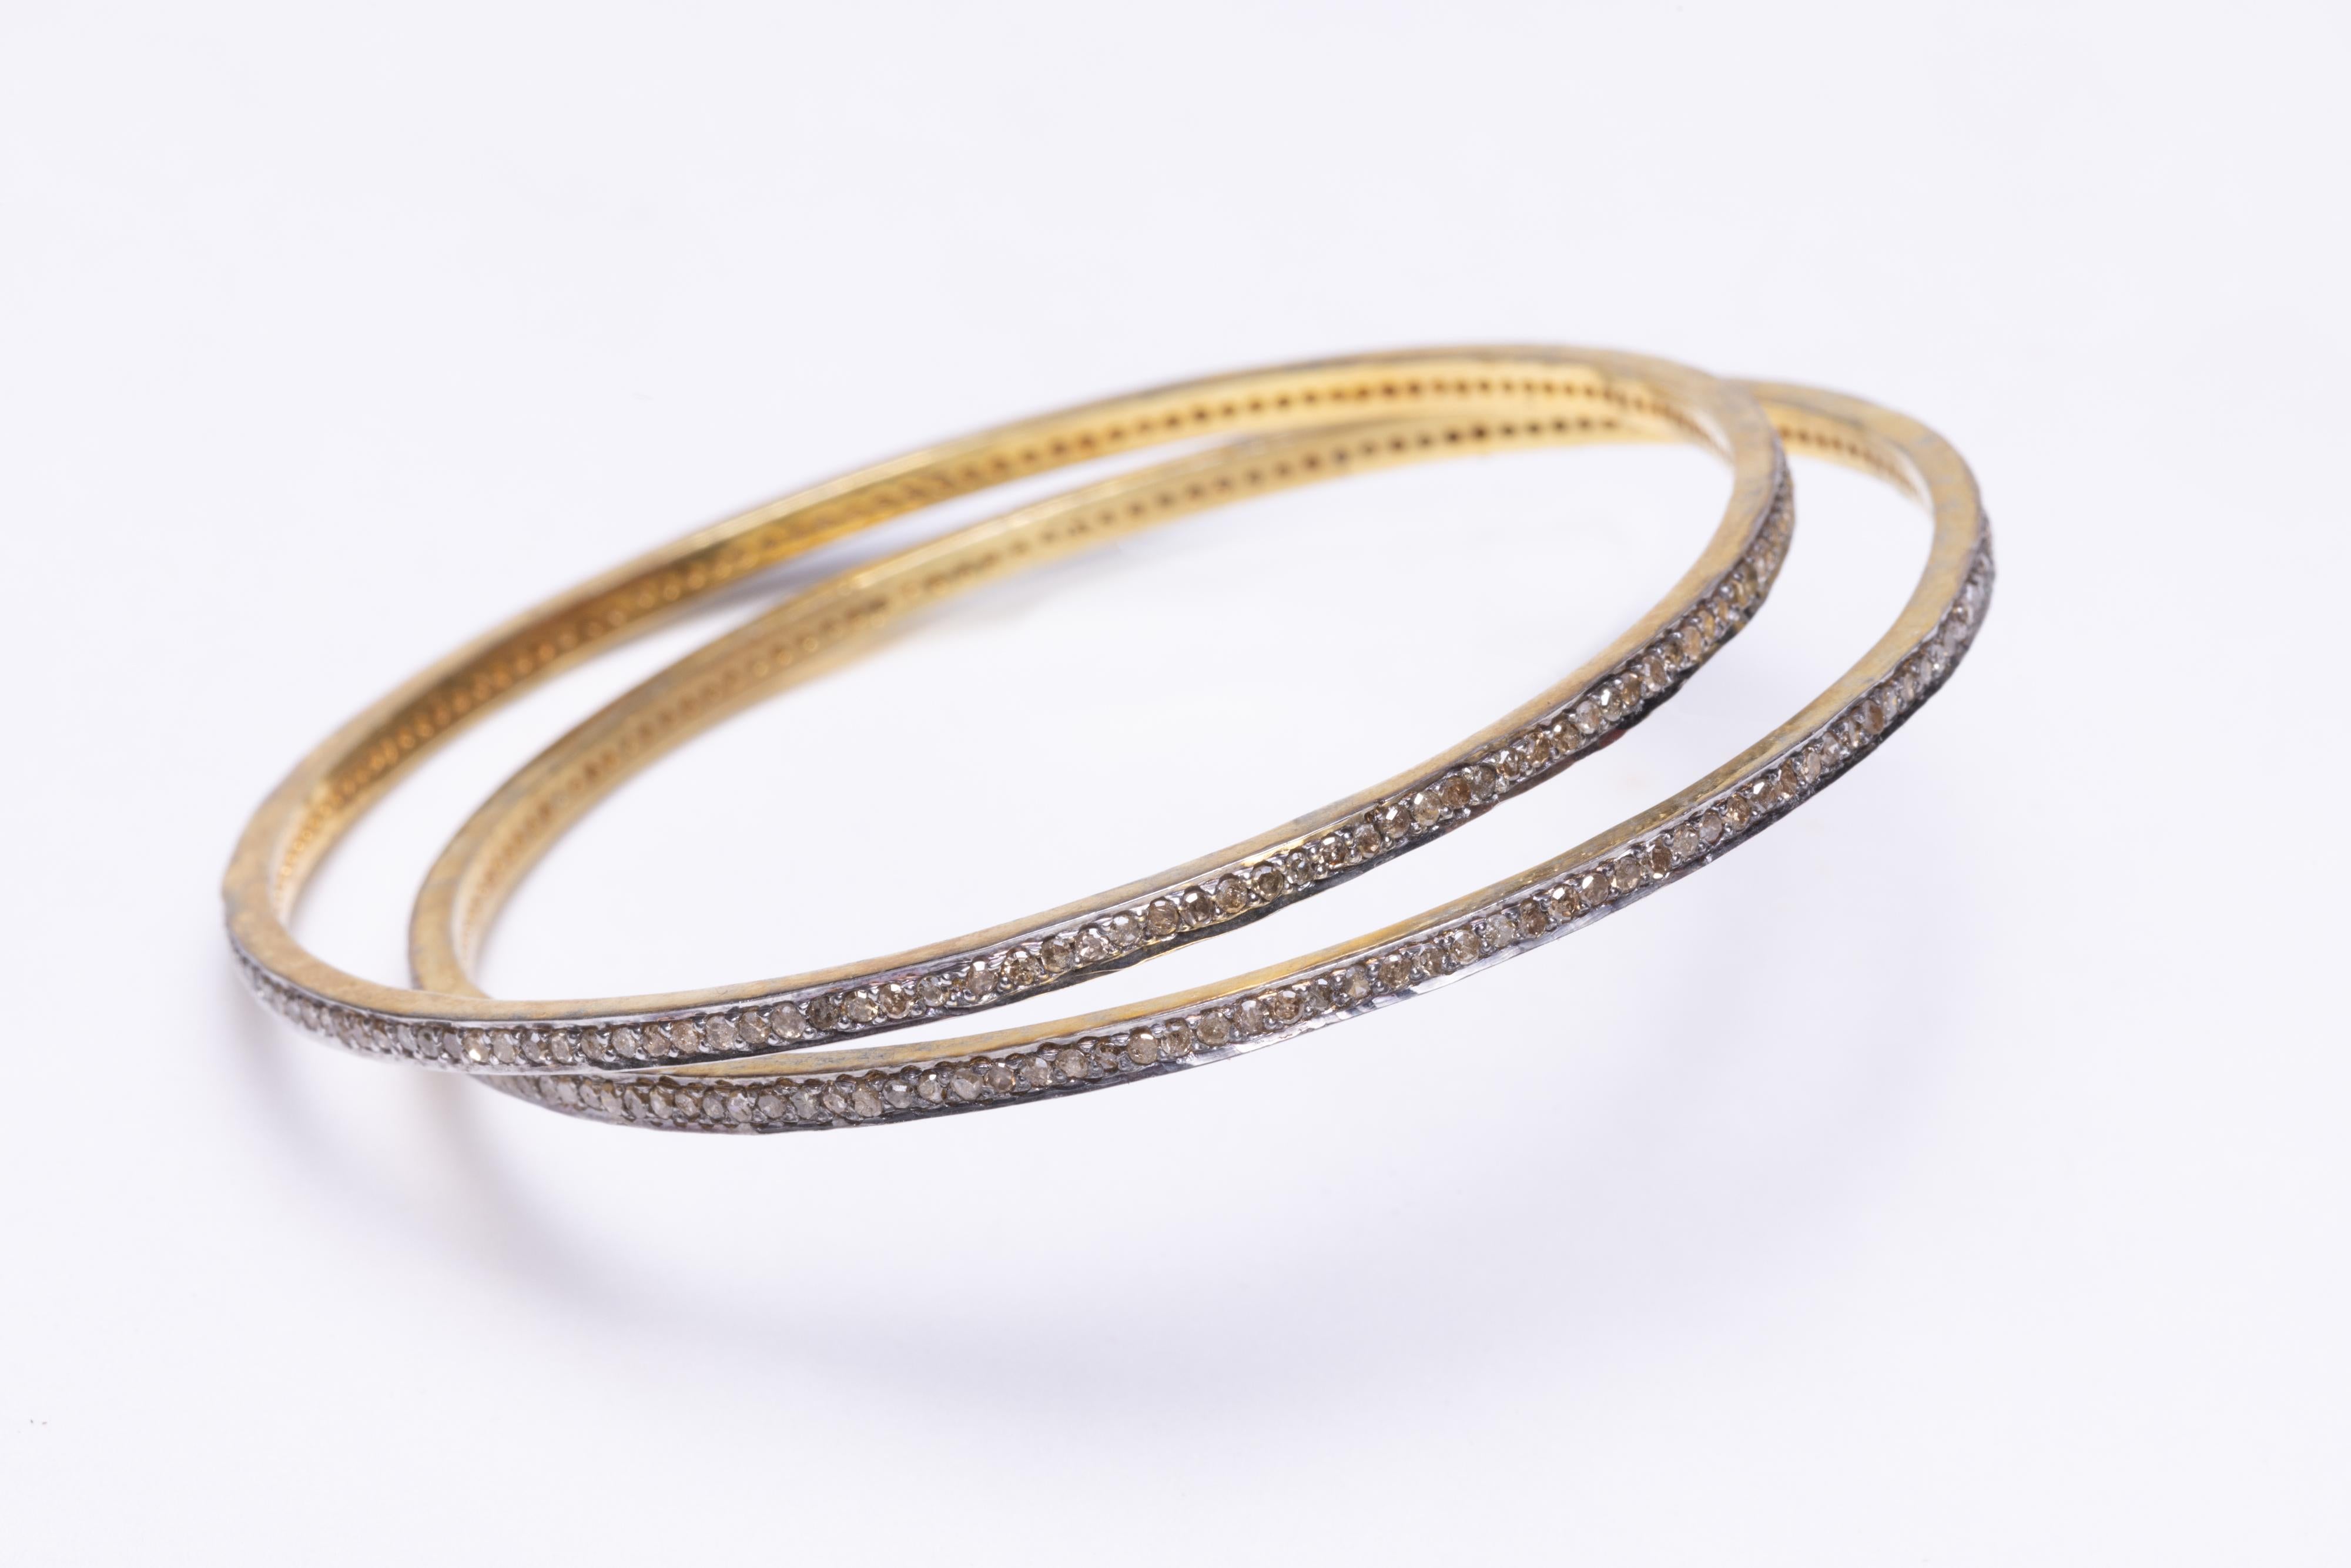   These pave`set diamond bangles can be worn alone, as a group or with other bracelets in your collection.  They slip over the hand and the inside circumference is 7.5